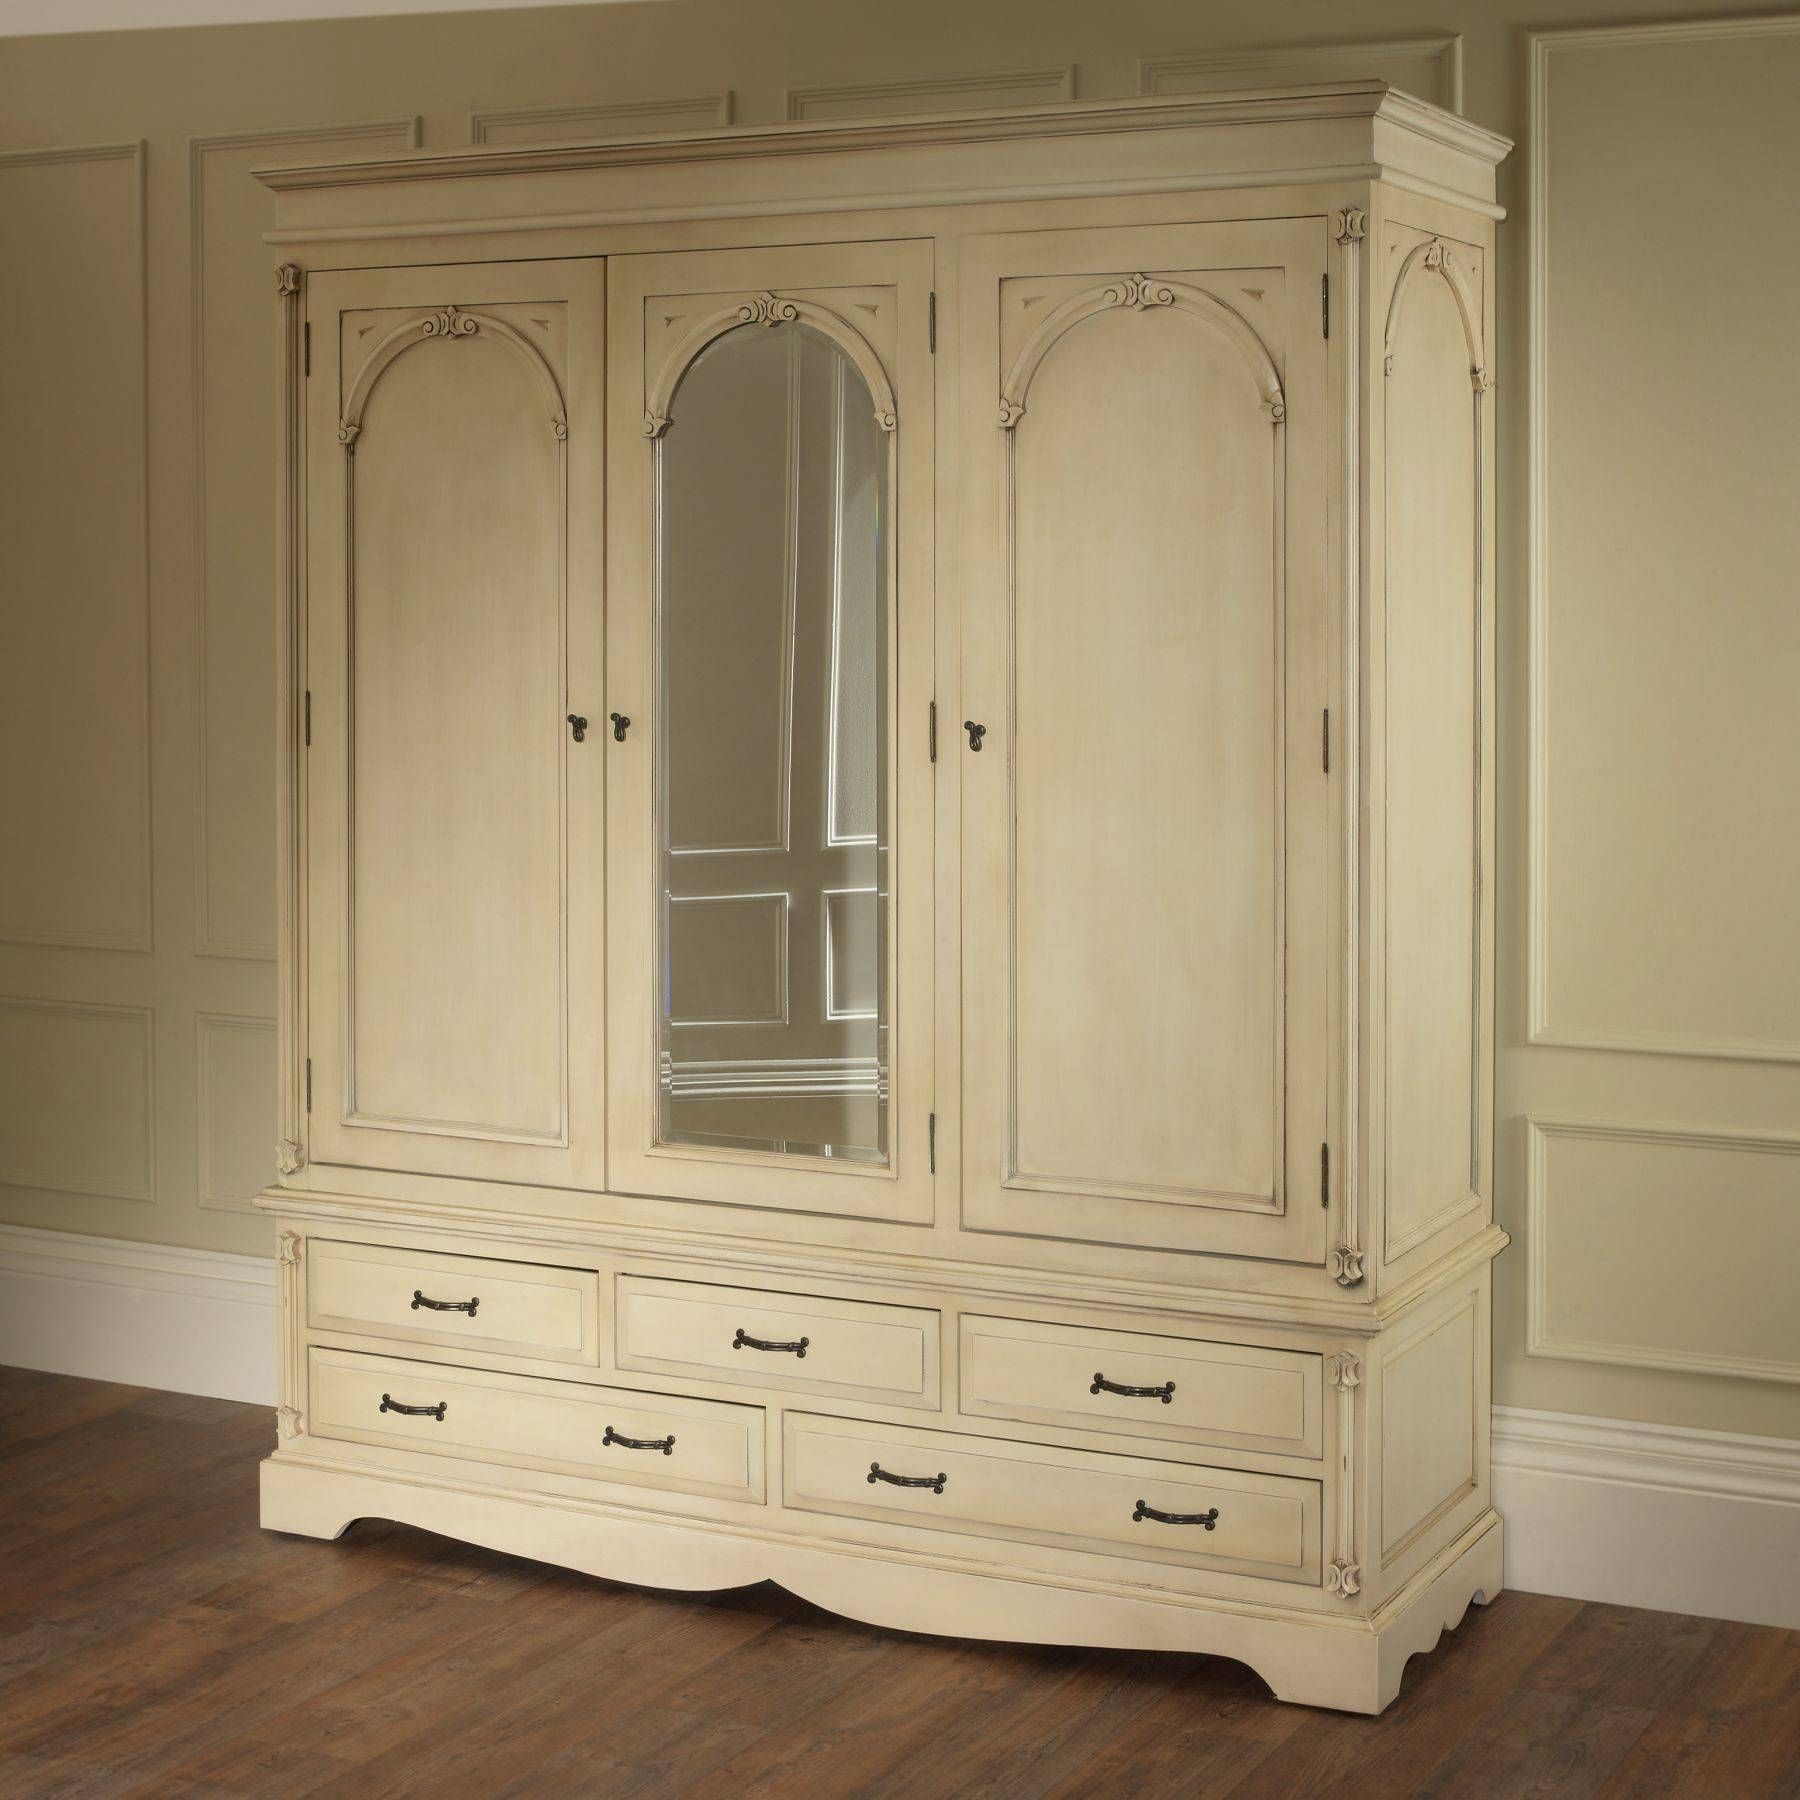 Furniture: Exciting Armoire Wardrobe For Interior Storage Design In Large White Wardrobes With Drawers (View 11 of 15)